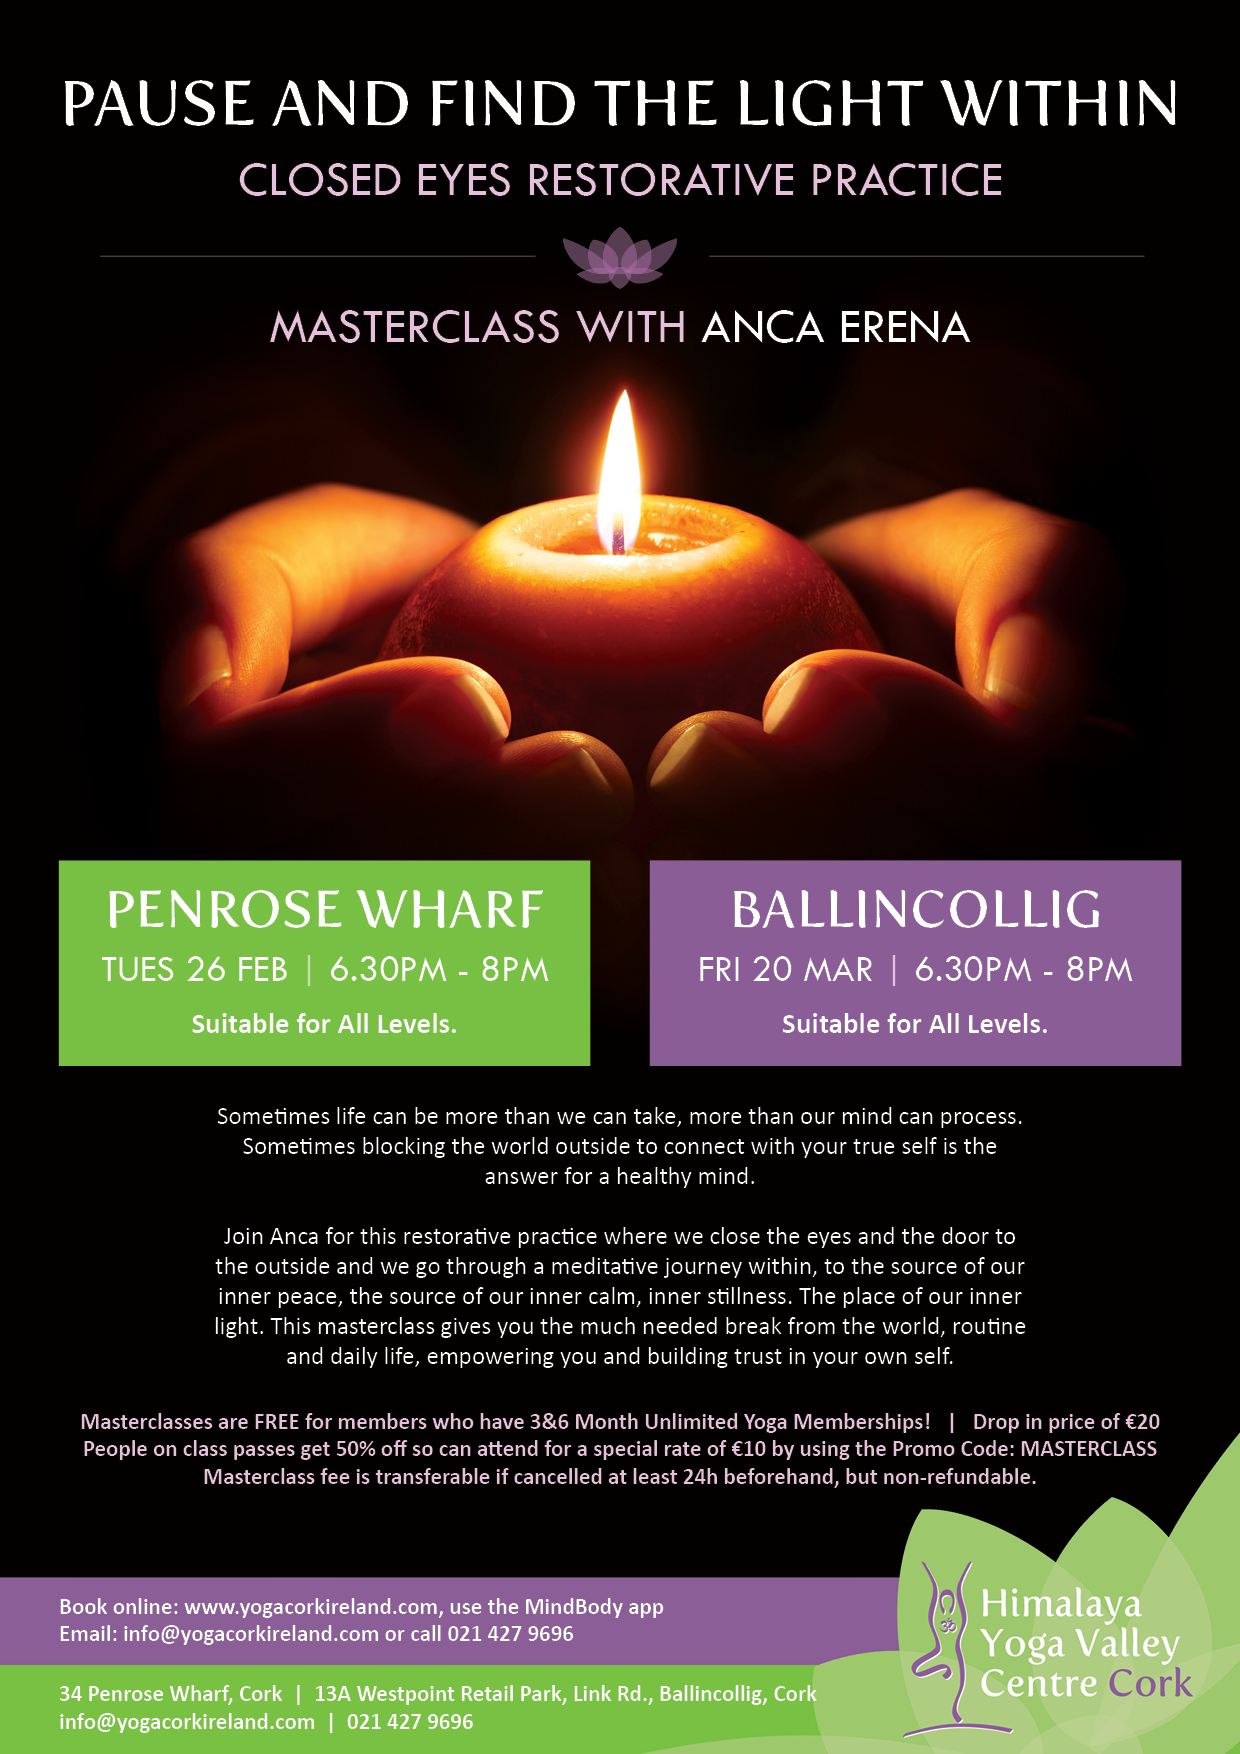 Masterclass Pause And Find The Light Within Himalaya Yoga Valley Centre Cork Online Yoga